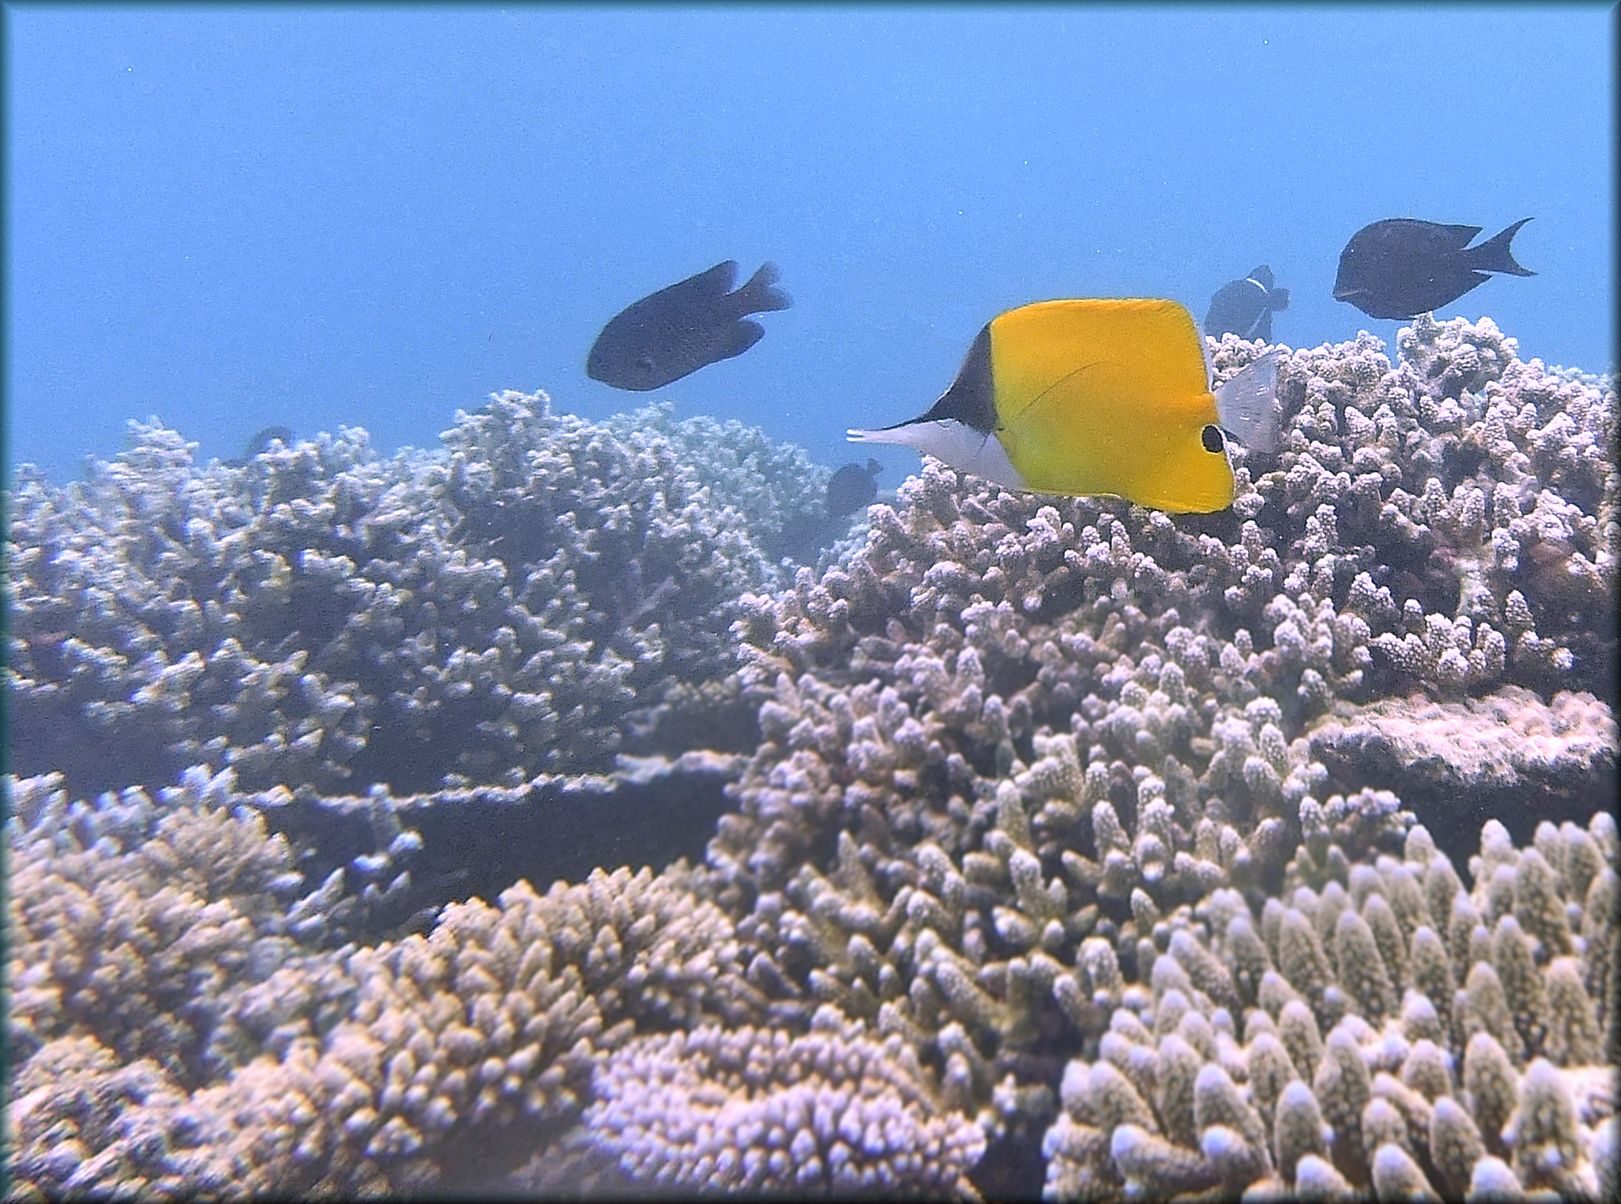 Long nosed butterflyfish -poor white balance control